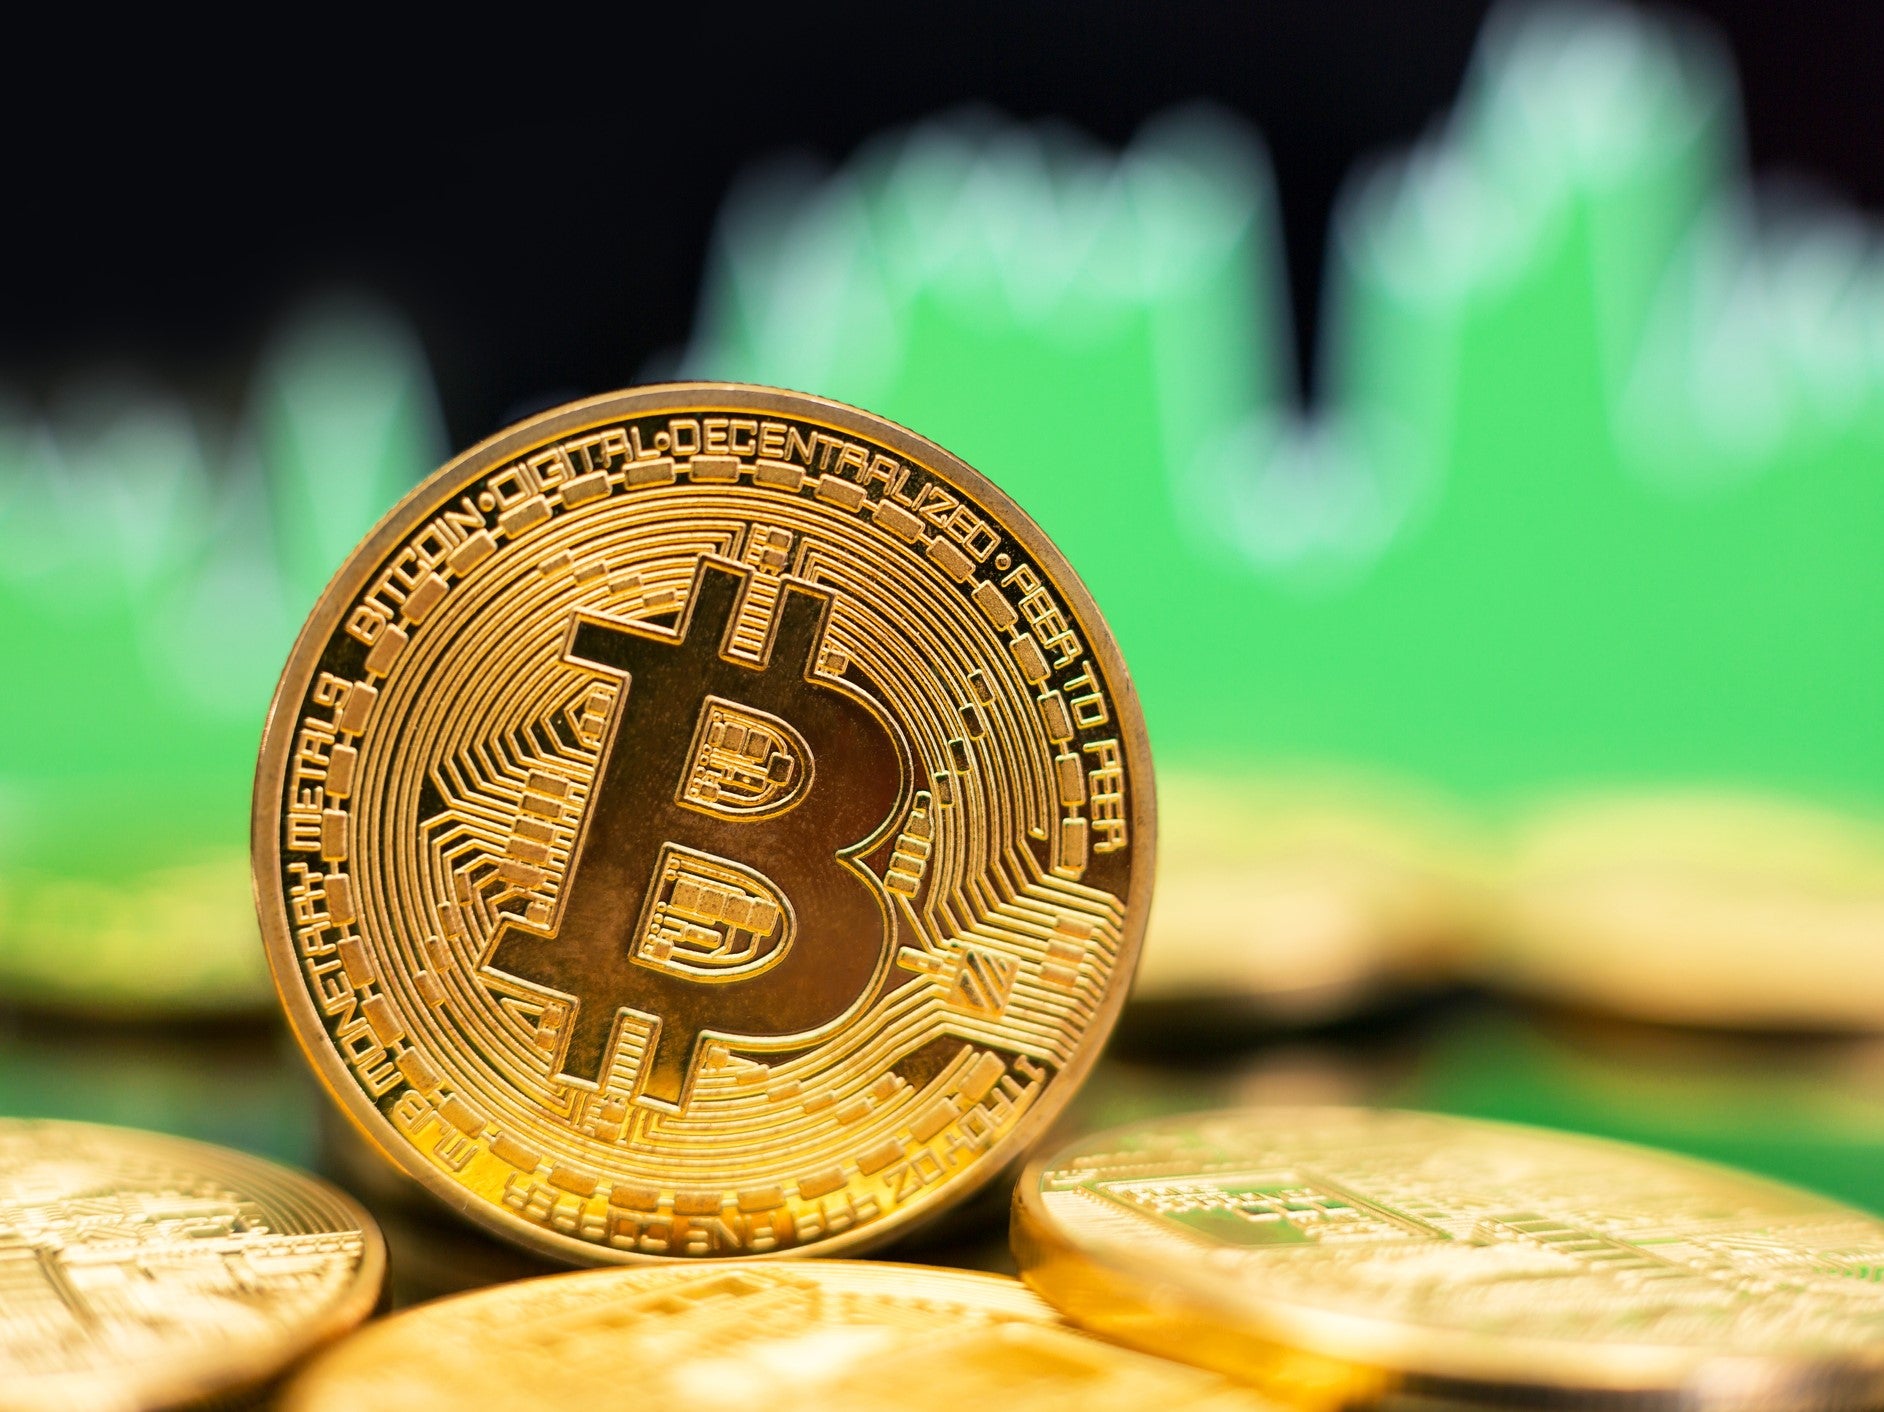 Bitcoin shot up by 7 per cent on 29 November, 2021, amid a market-wide recovery